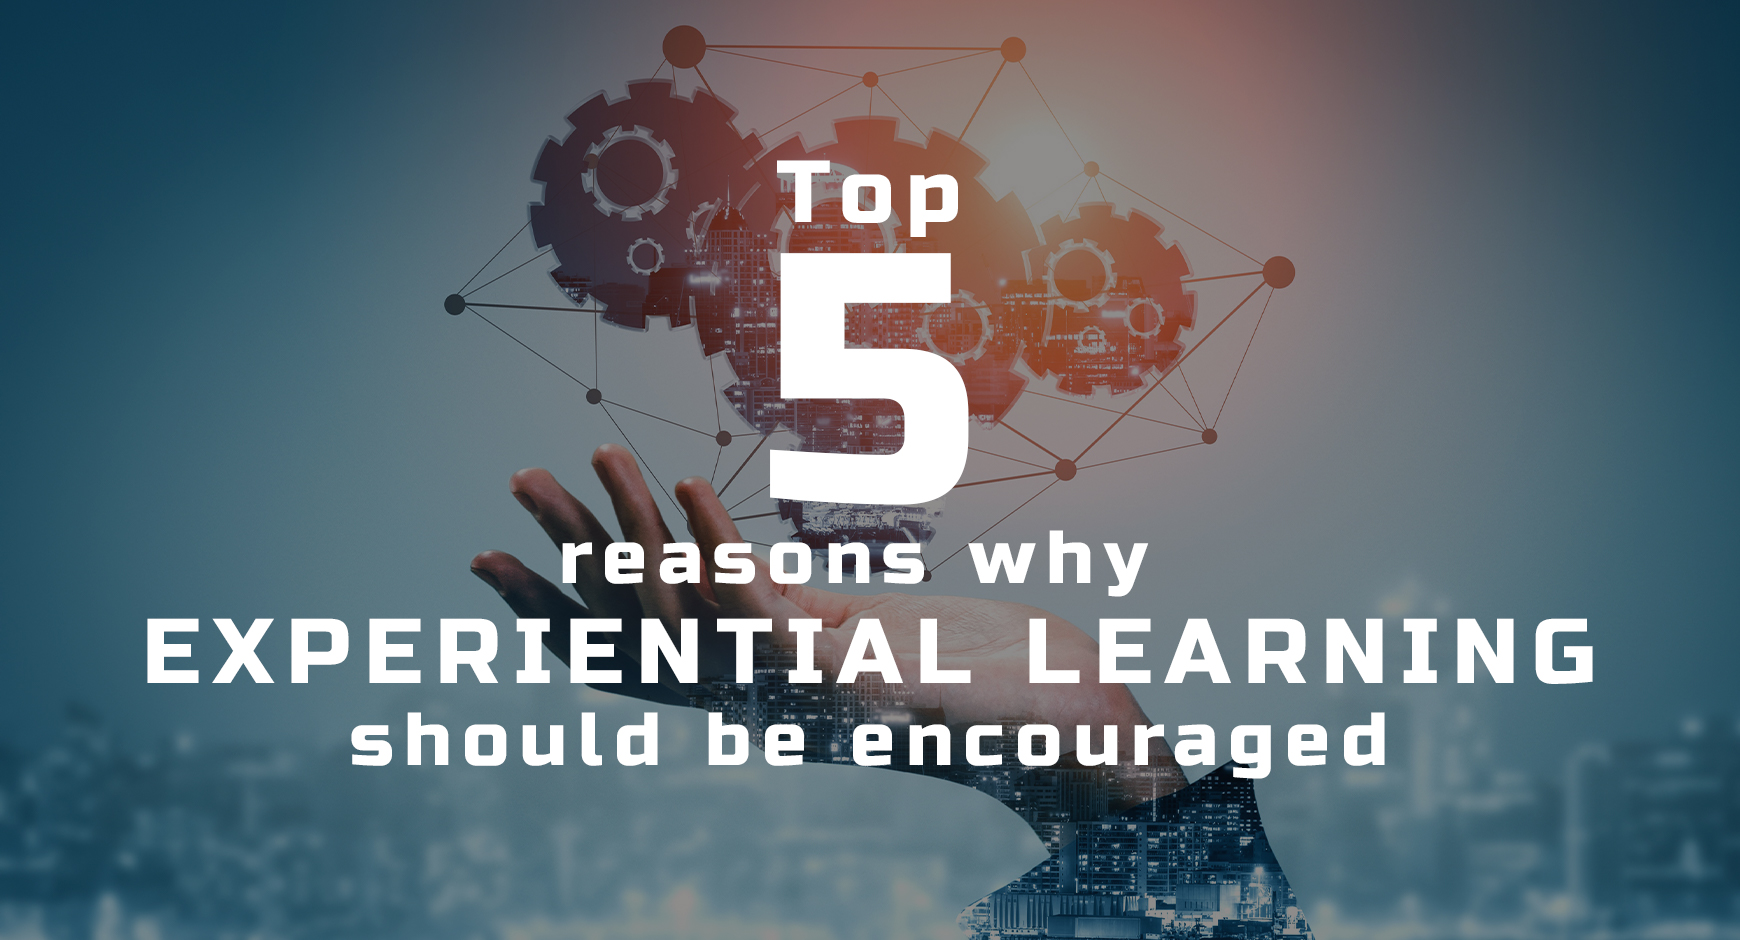 Top Five Reasons Why Experiential Learning Should be Encouraged